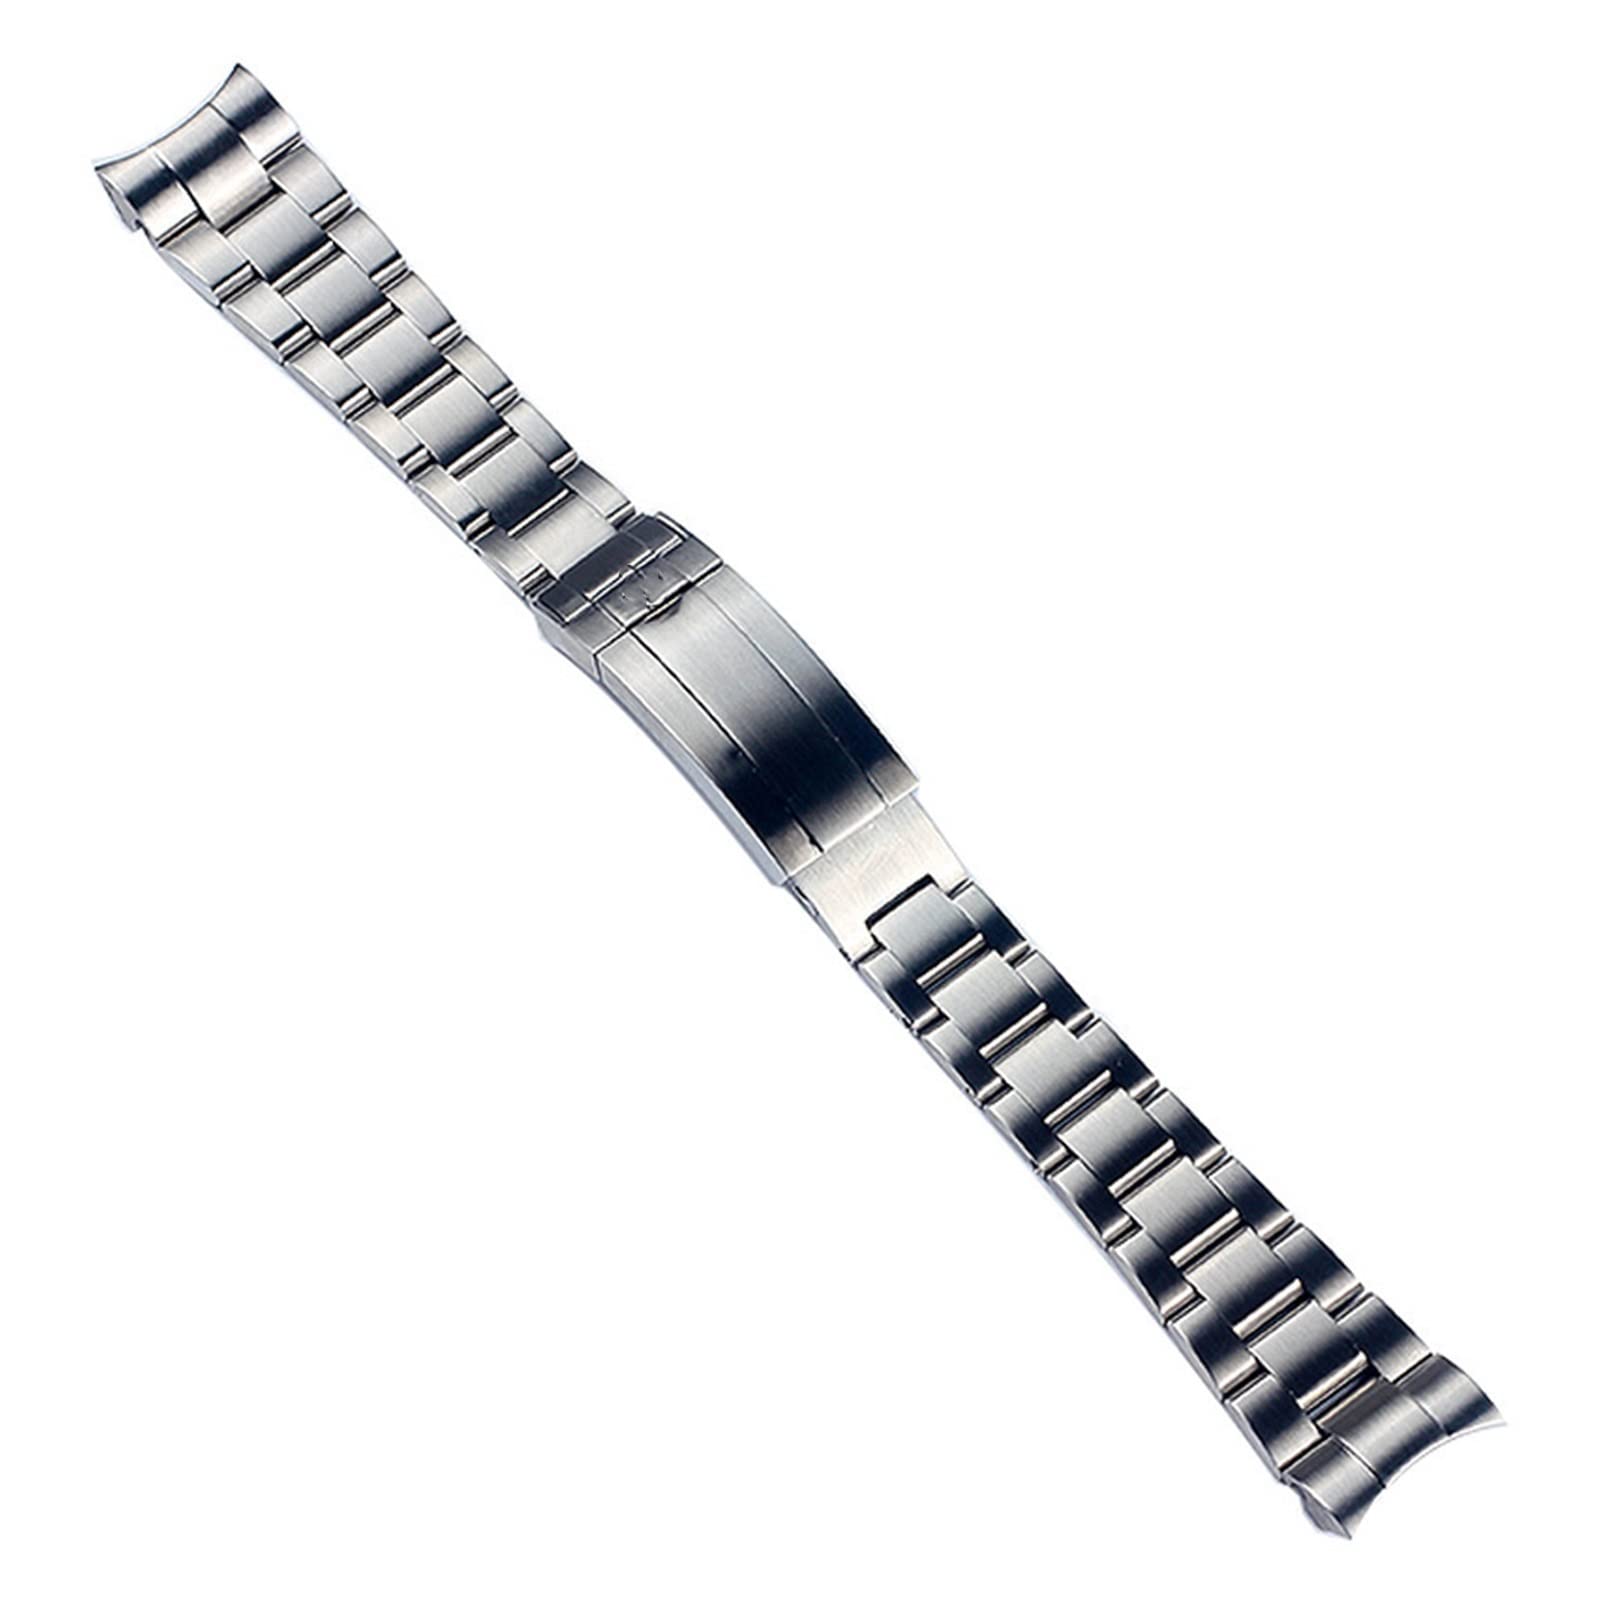 TRDYBSK Stainless Steel Watch Band Fit for Water Ghost 21mm 20mm Metal Strap Watch Accessories Men Watch Band Chain (Band Color : 21mm)